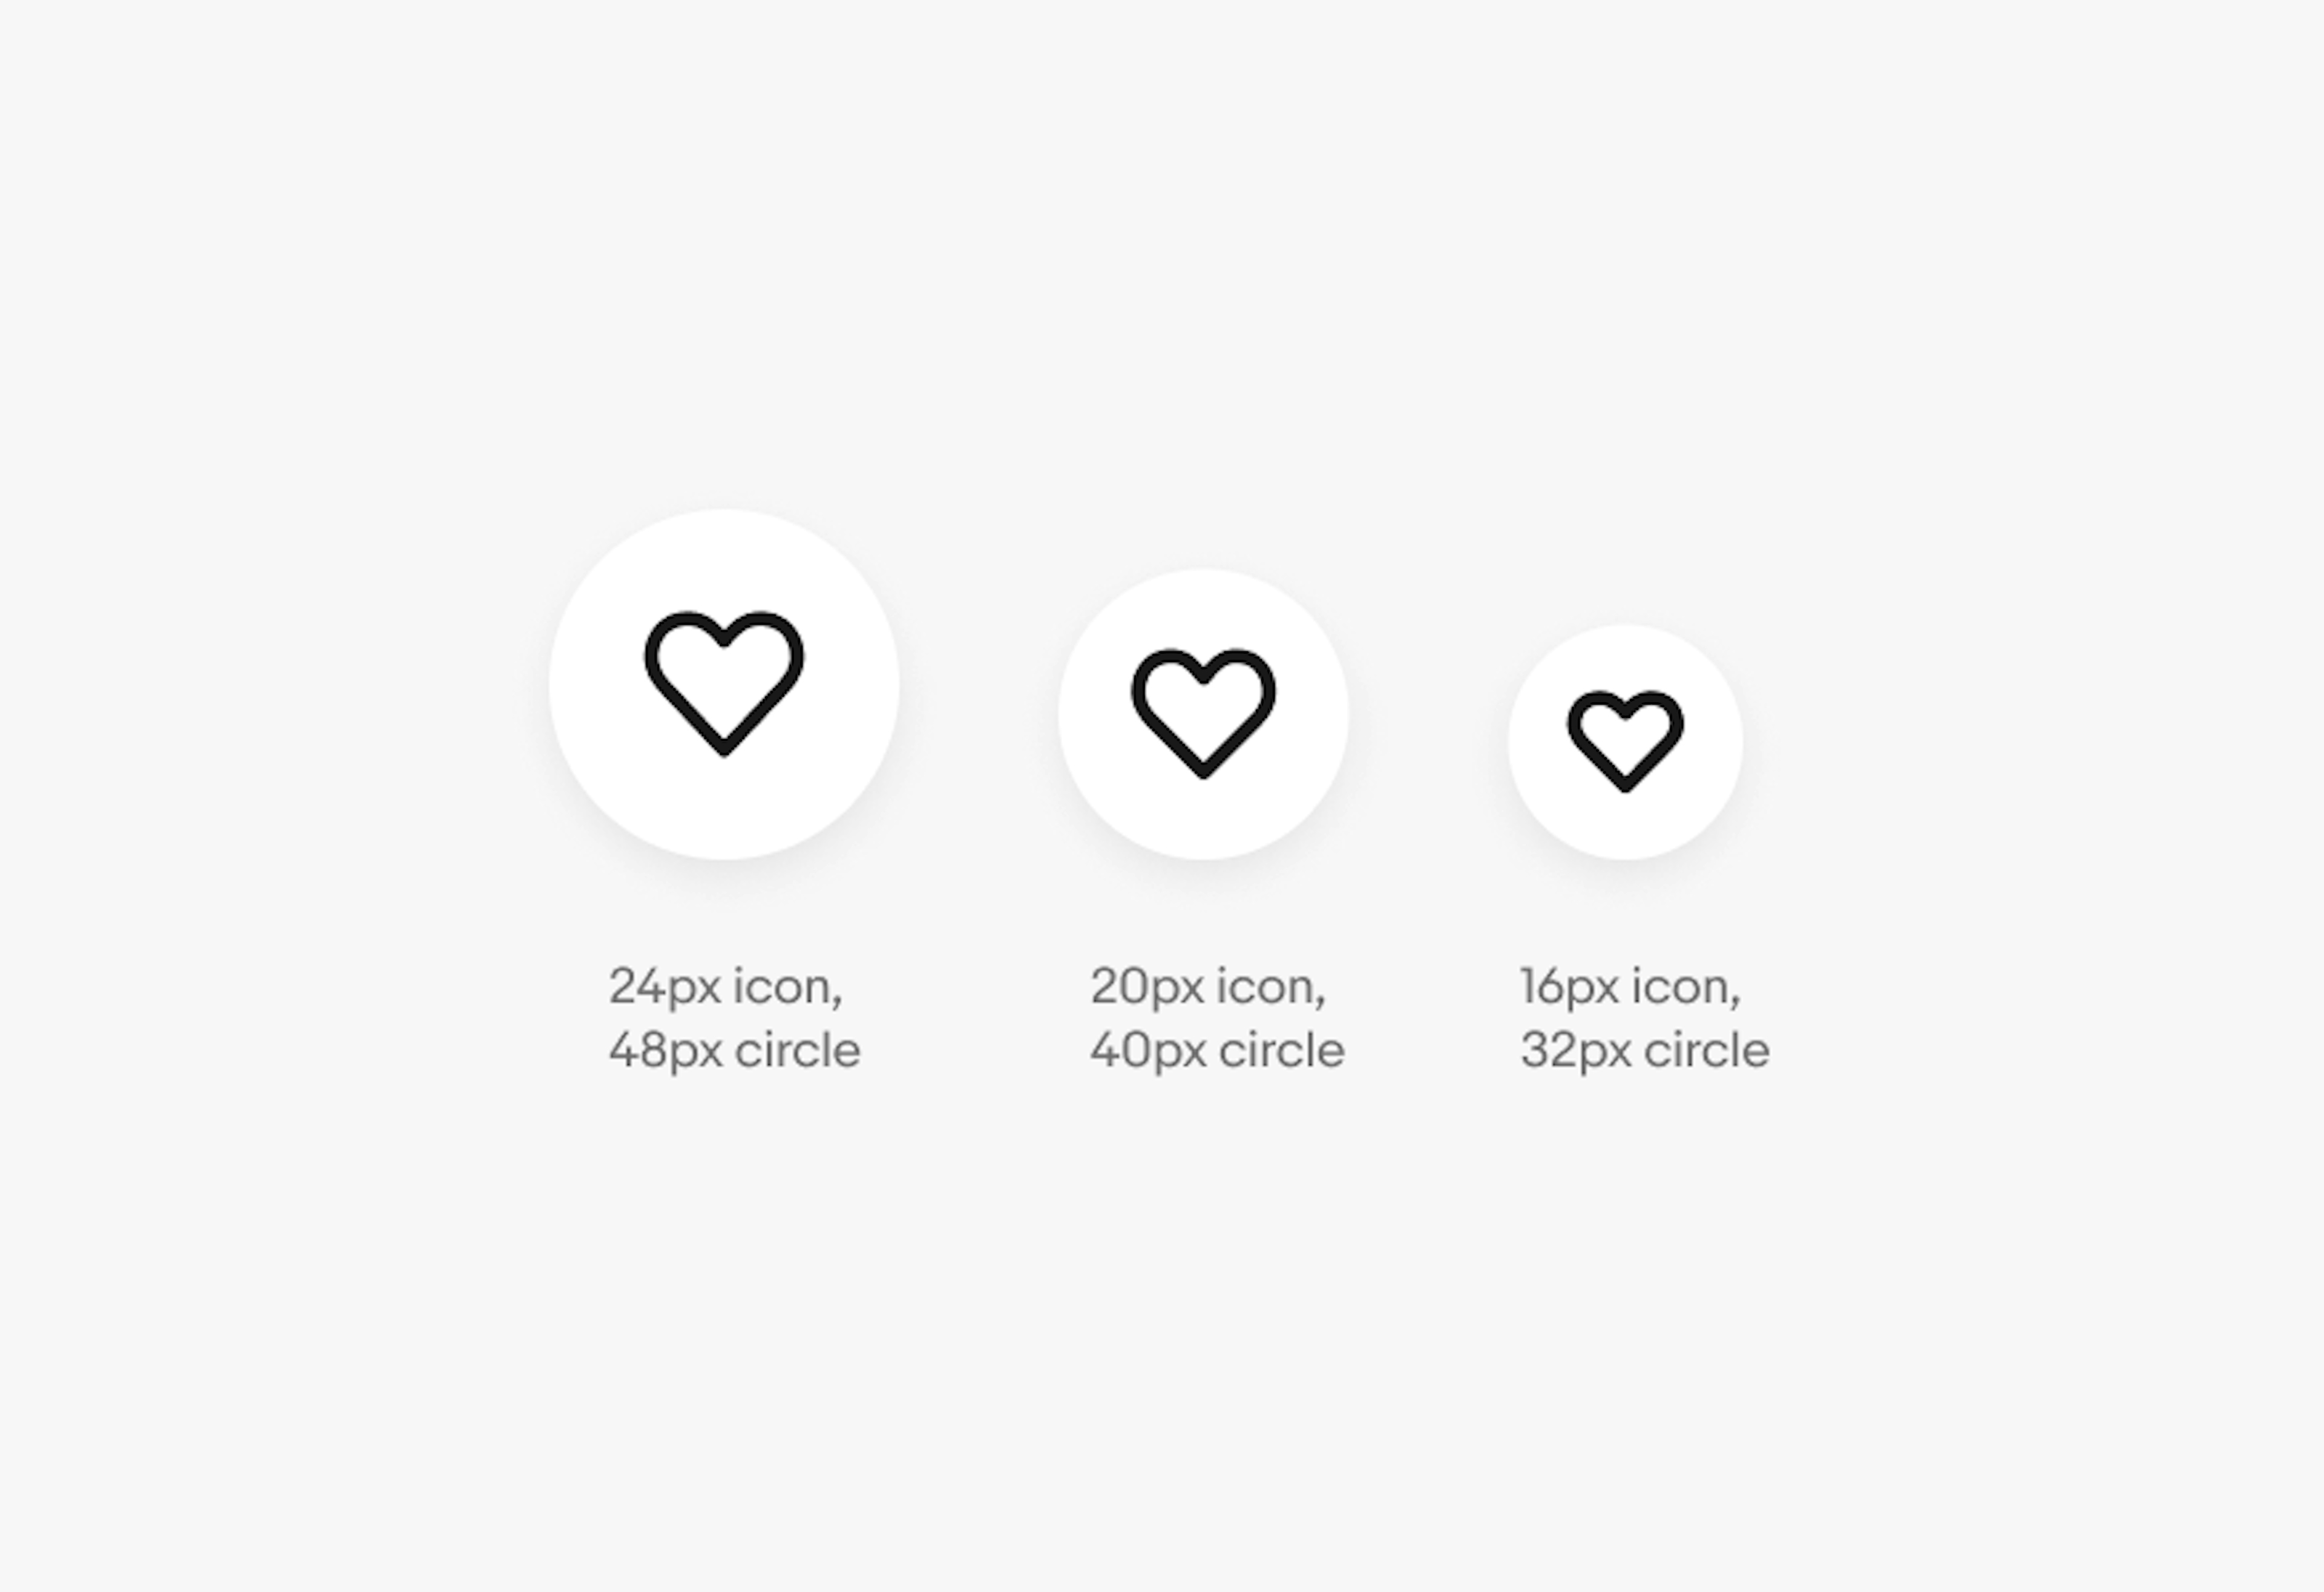 A collection of icon buttons with the proper icon sizes inside. The 48px button has a 24px icon, the 40px button has a 20px icon, and the 32px button has a 16px icon.